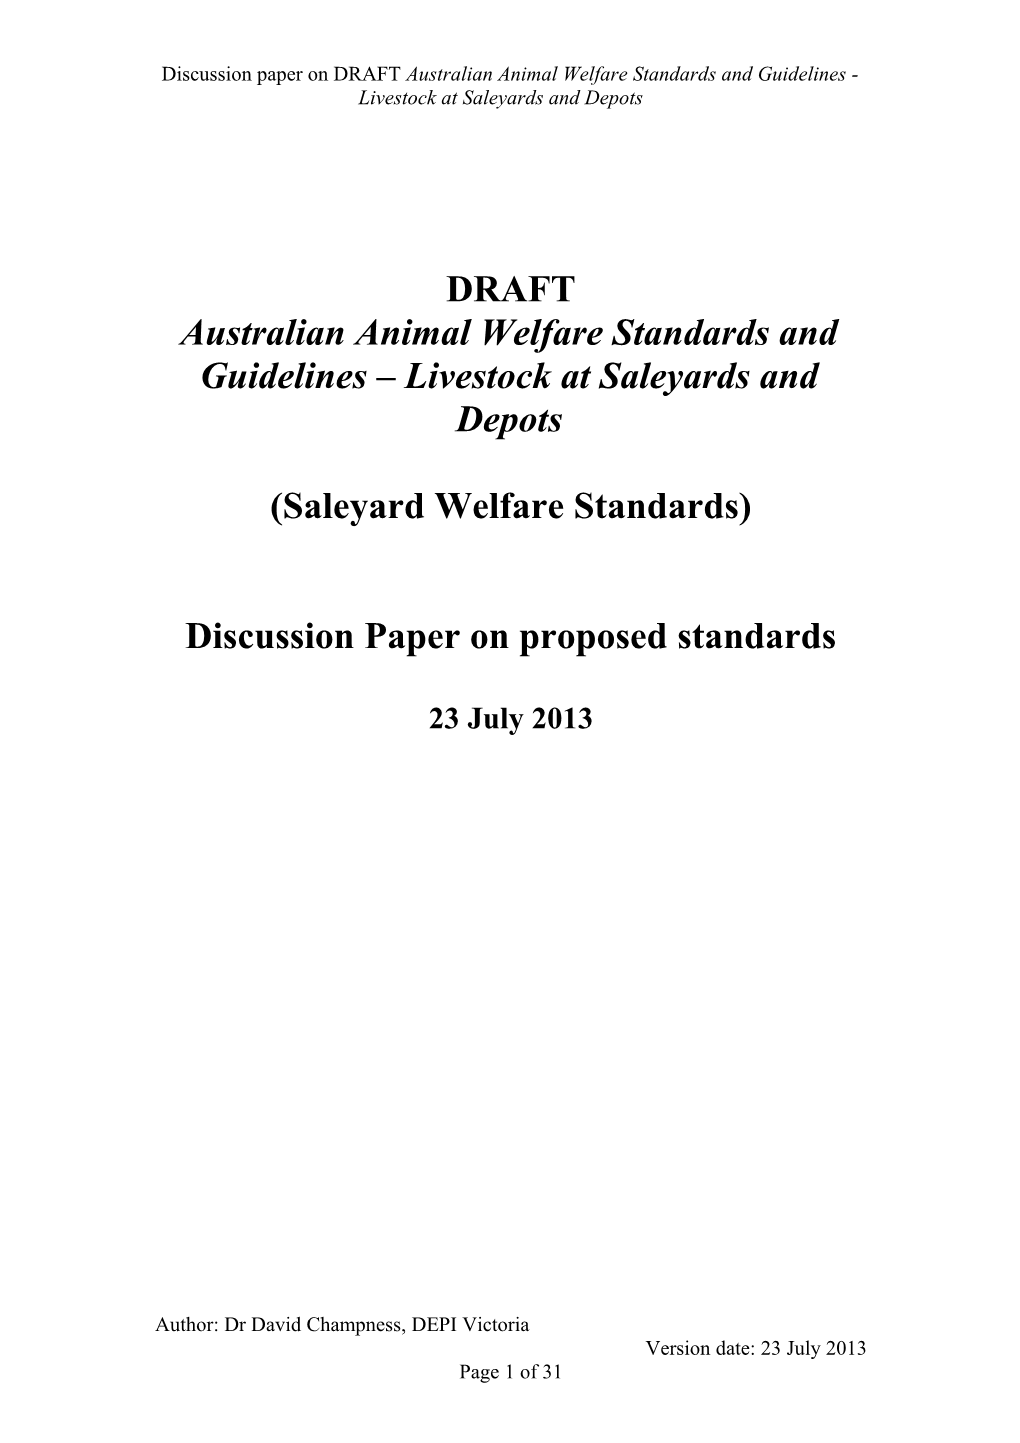 Standards and Guidelines for the Welfare of Livestock at Saleyards